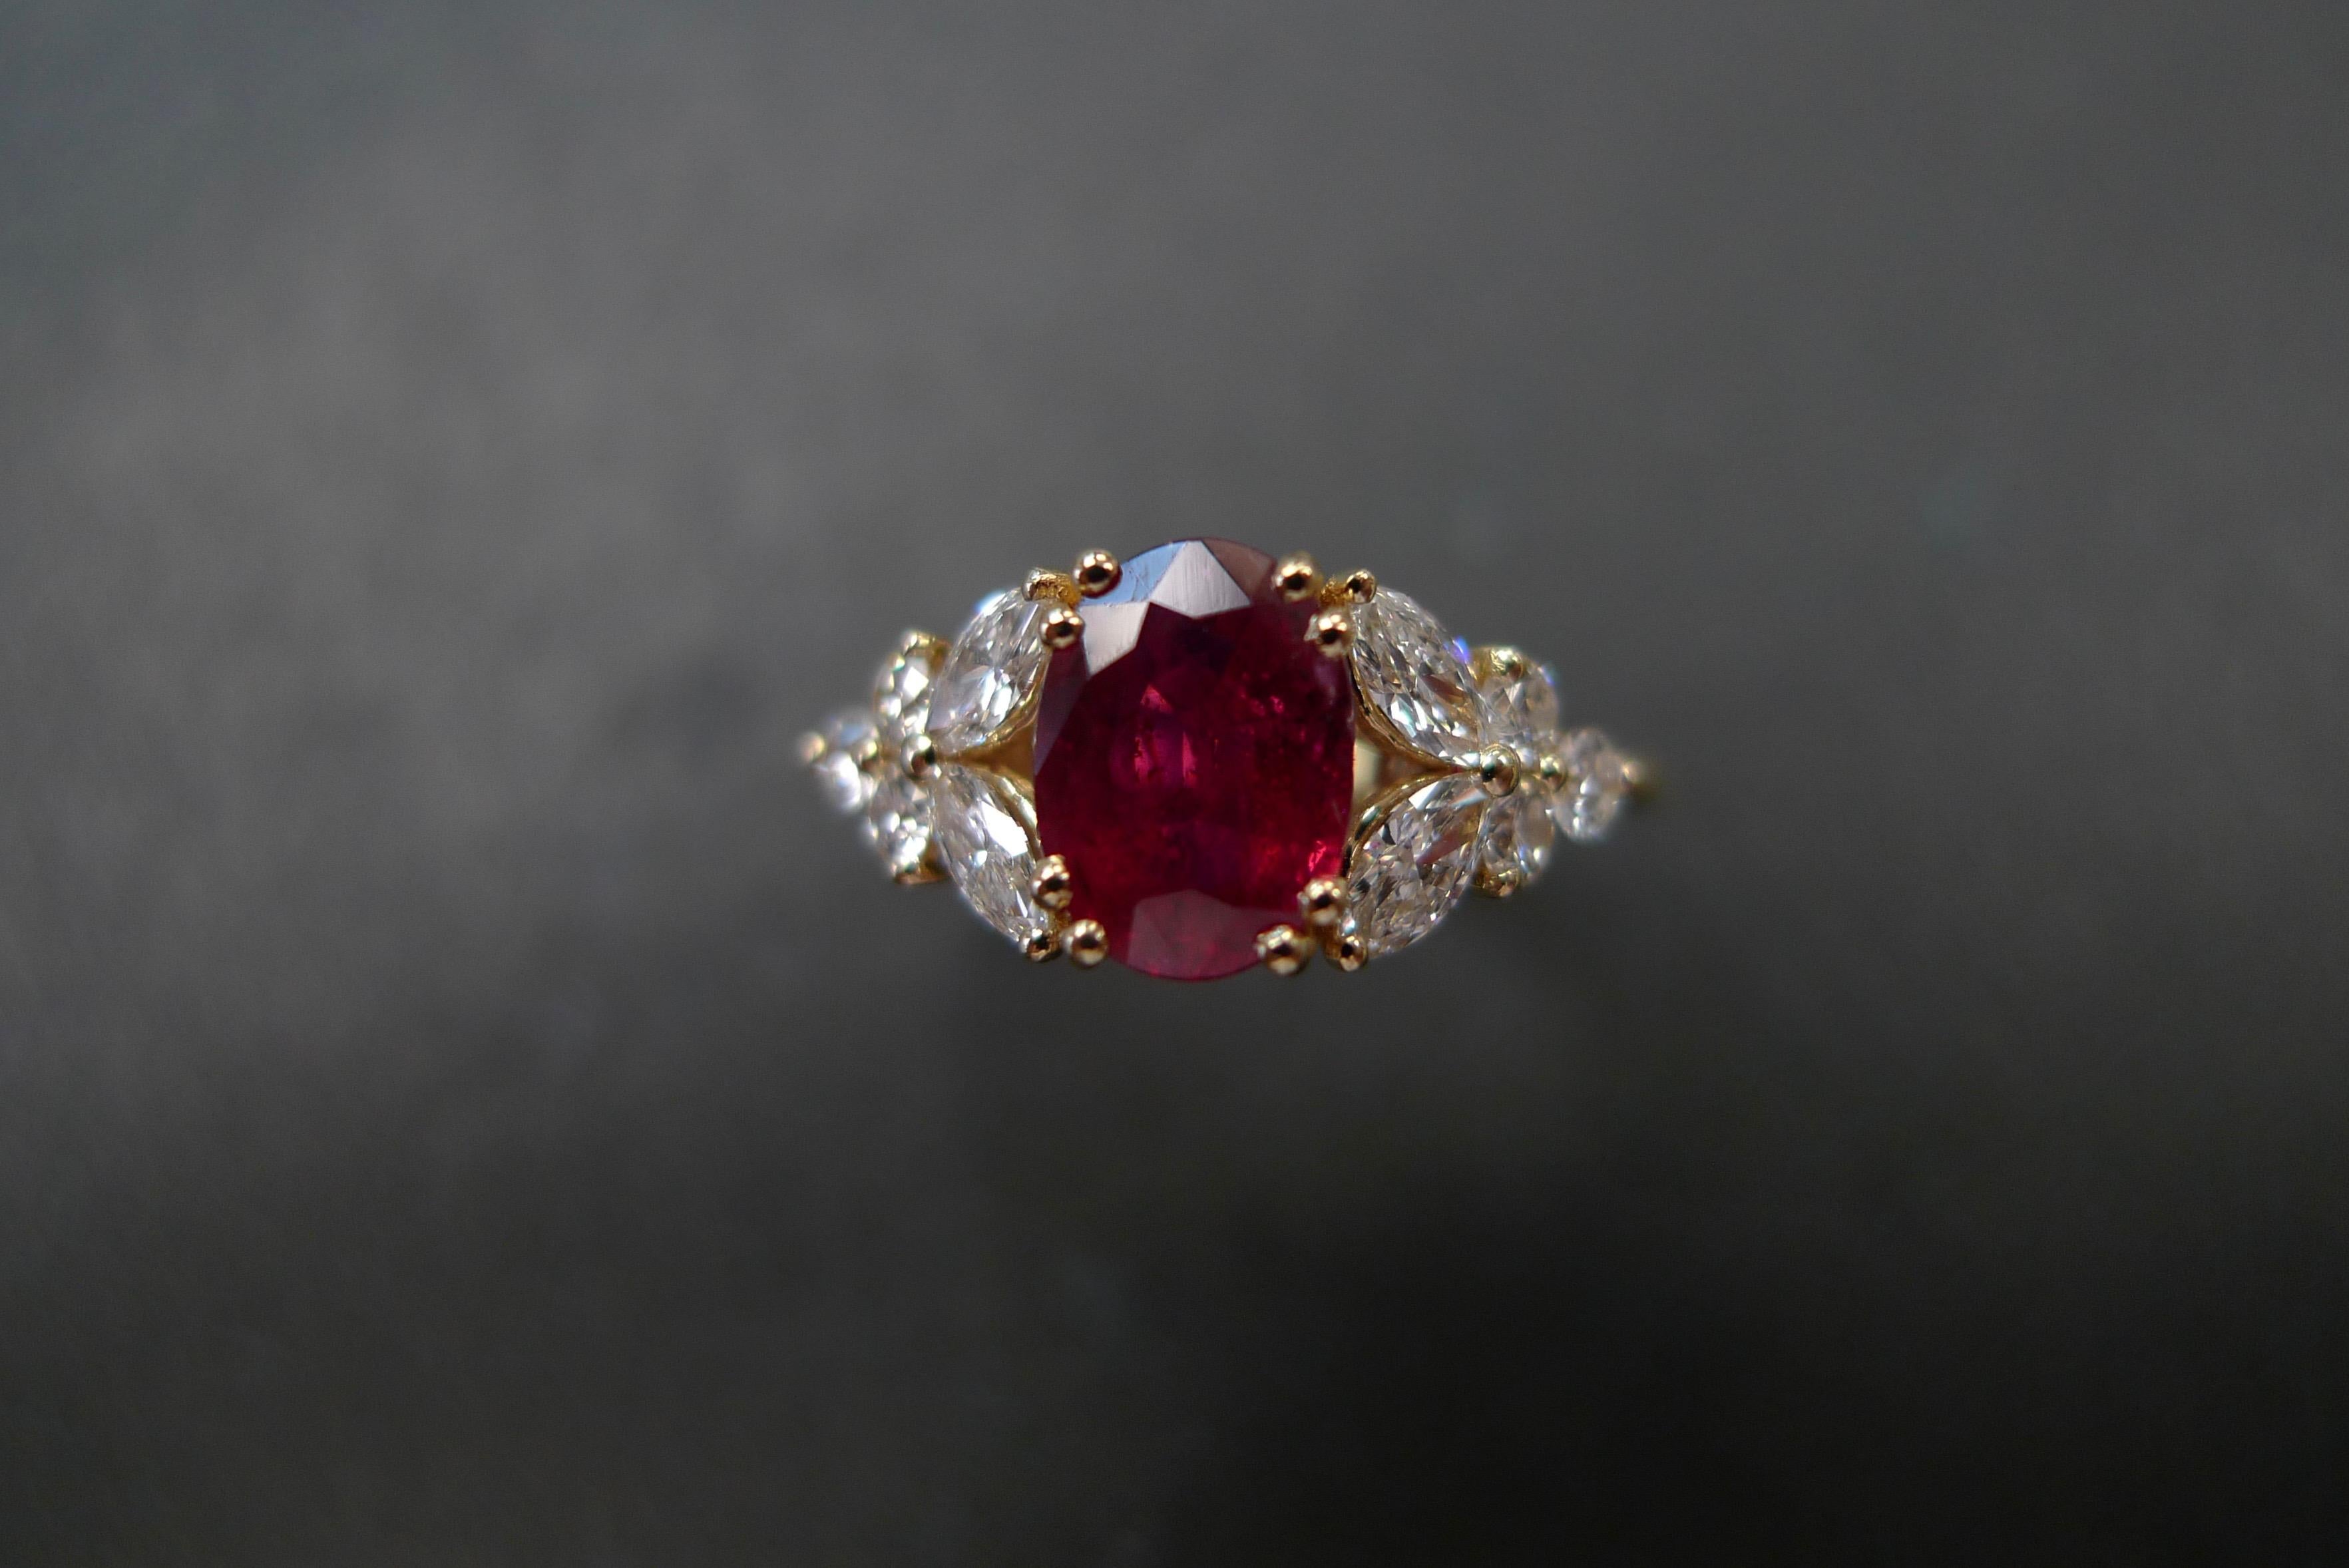 For Sale:  Natural Genuine Ruby and Marquise Diamonds Ring Made in 14k Yellow Gold  6